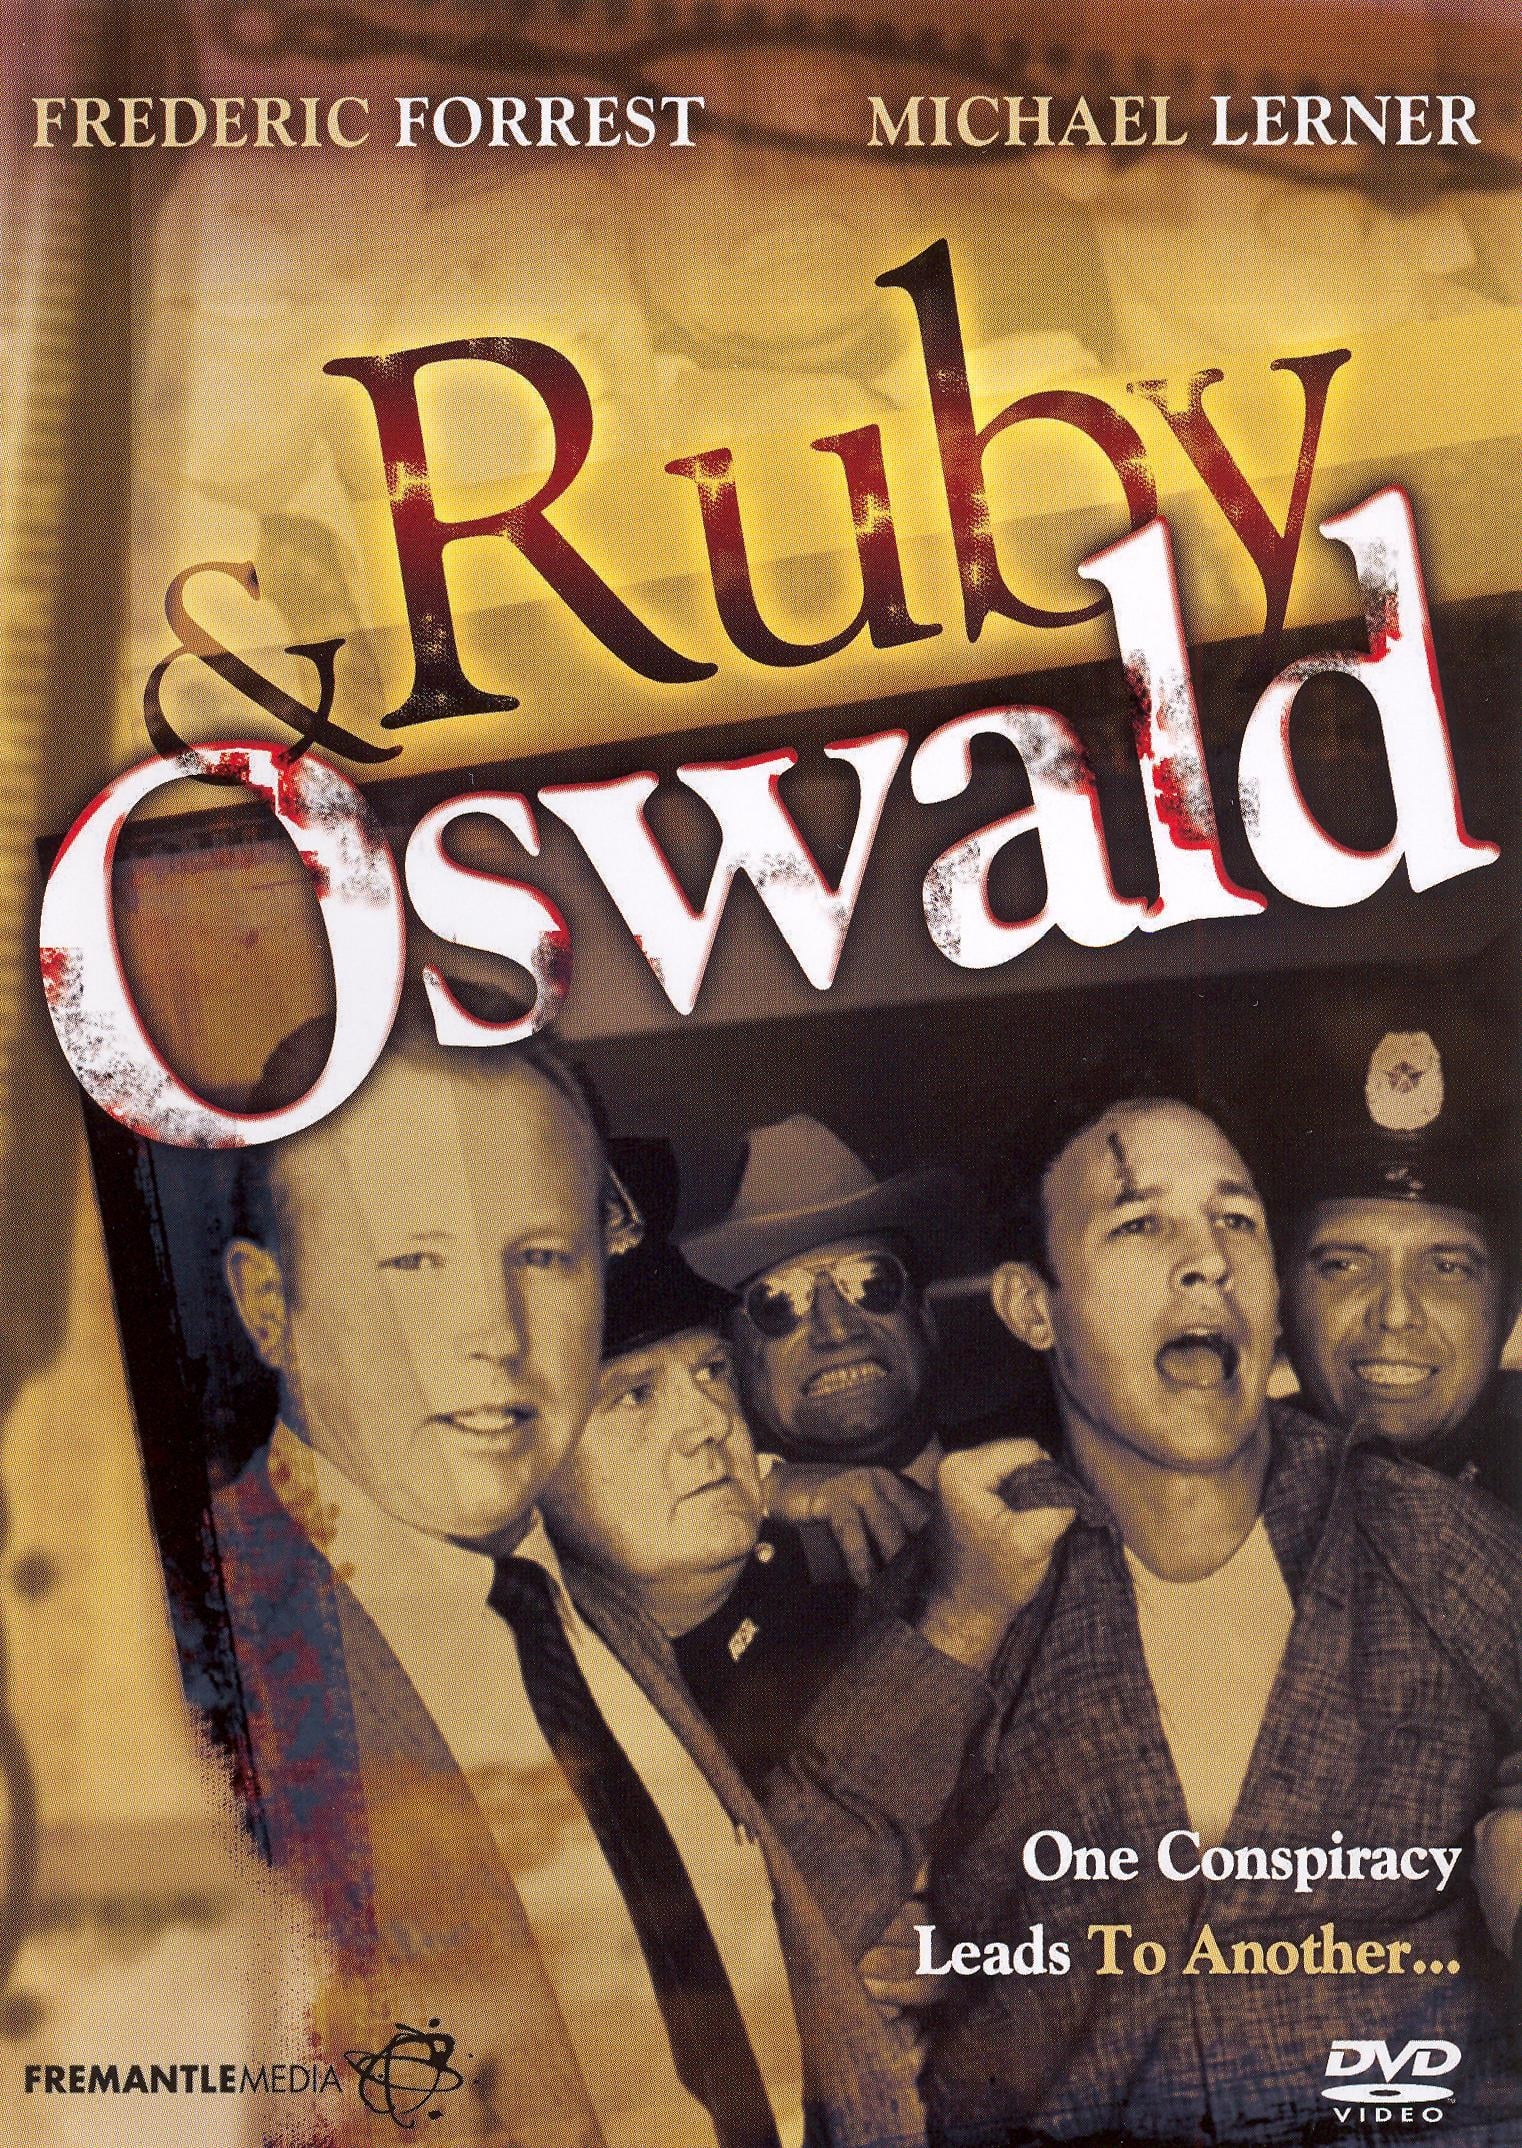 Ruby and Oswald (1978)